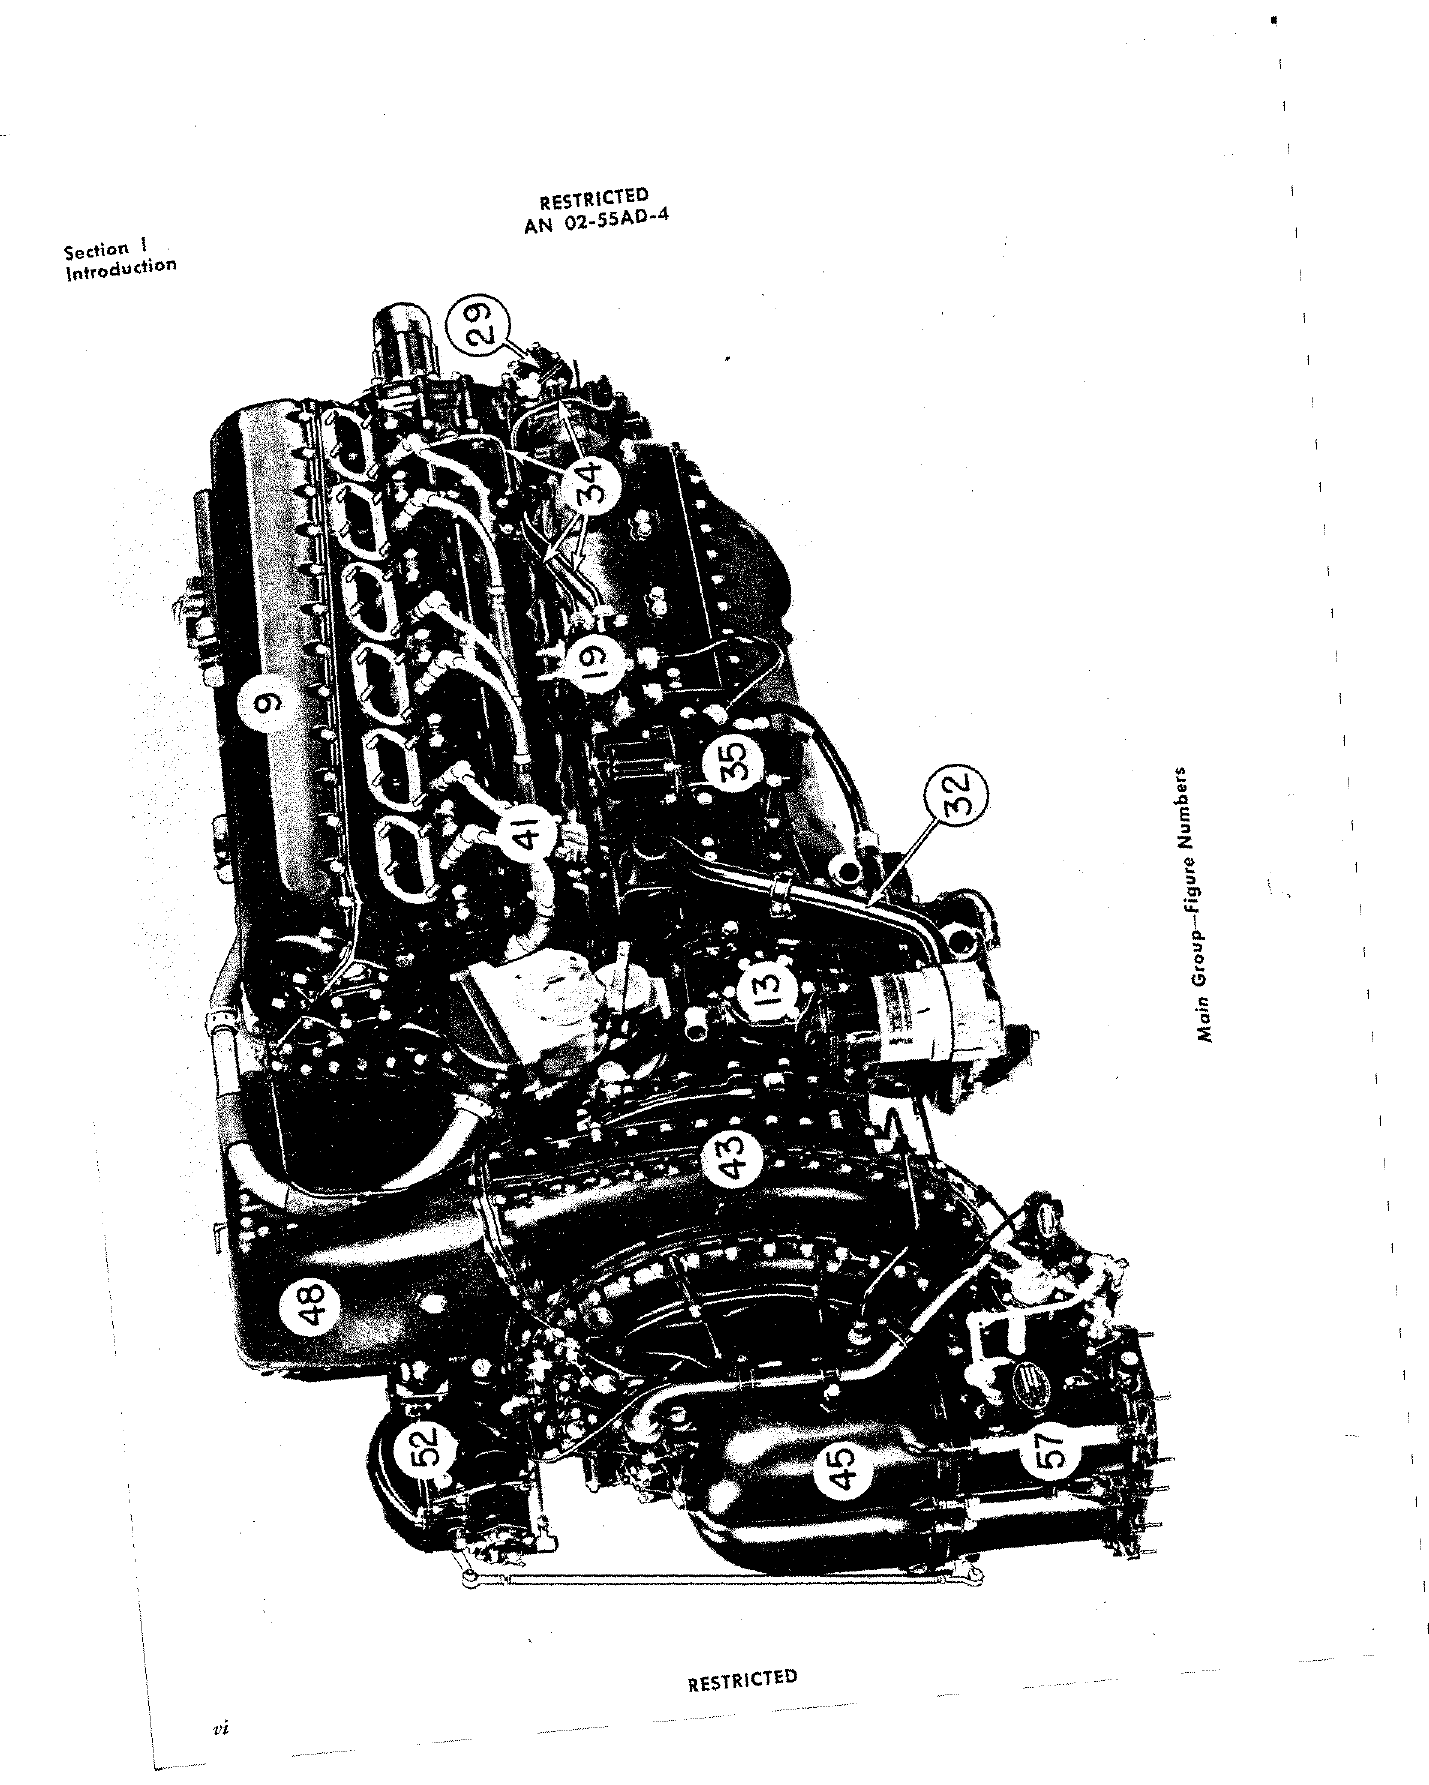 Sample page 8 from AirCorps Library document: Parts Catalog for Engine Models V-1650-9, V-1650-9A, V-1650-11, and V-1650-21 - Merlin 300 and 301